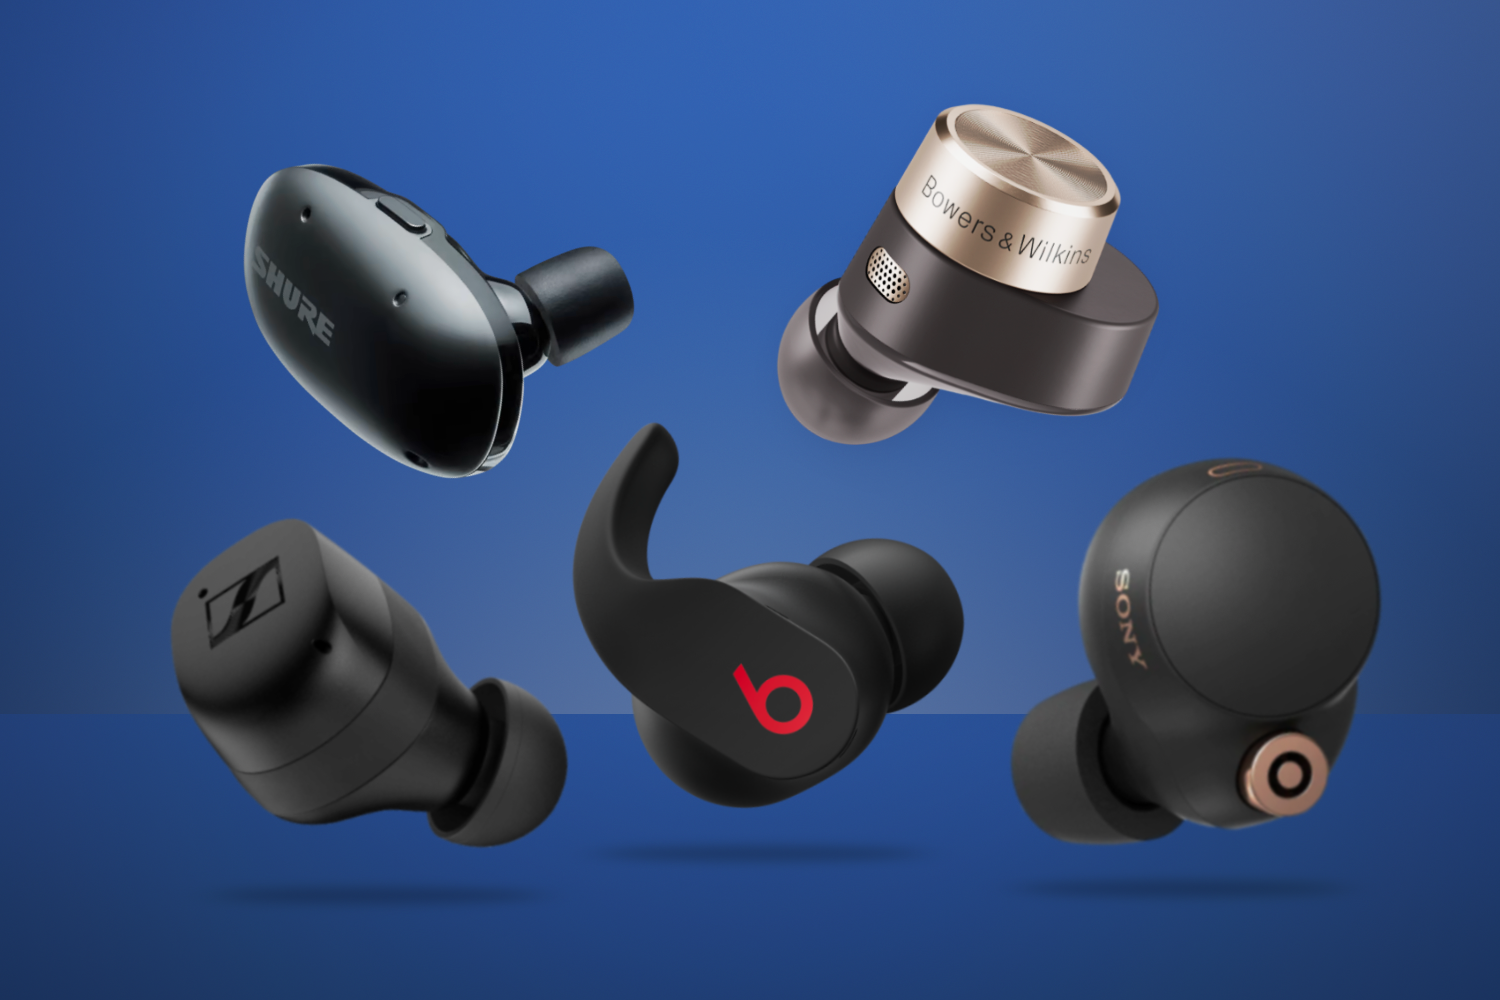 Earbuds Wireless Headphones Don't miss the campaign